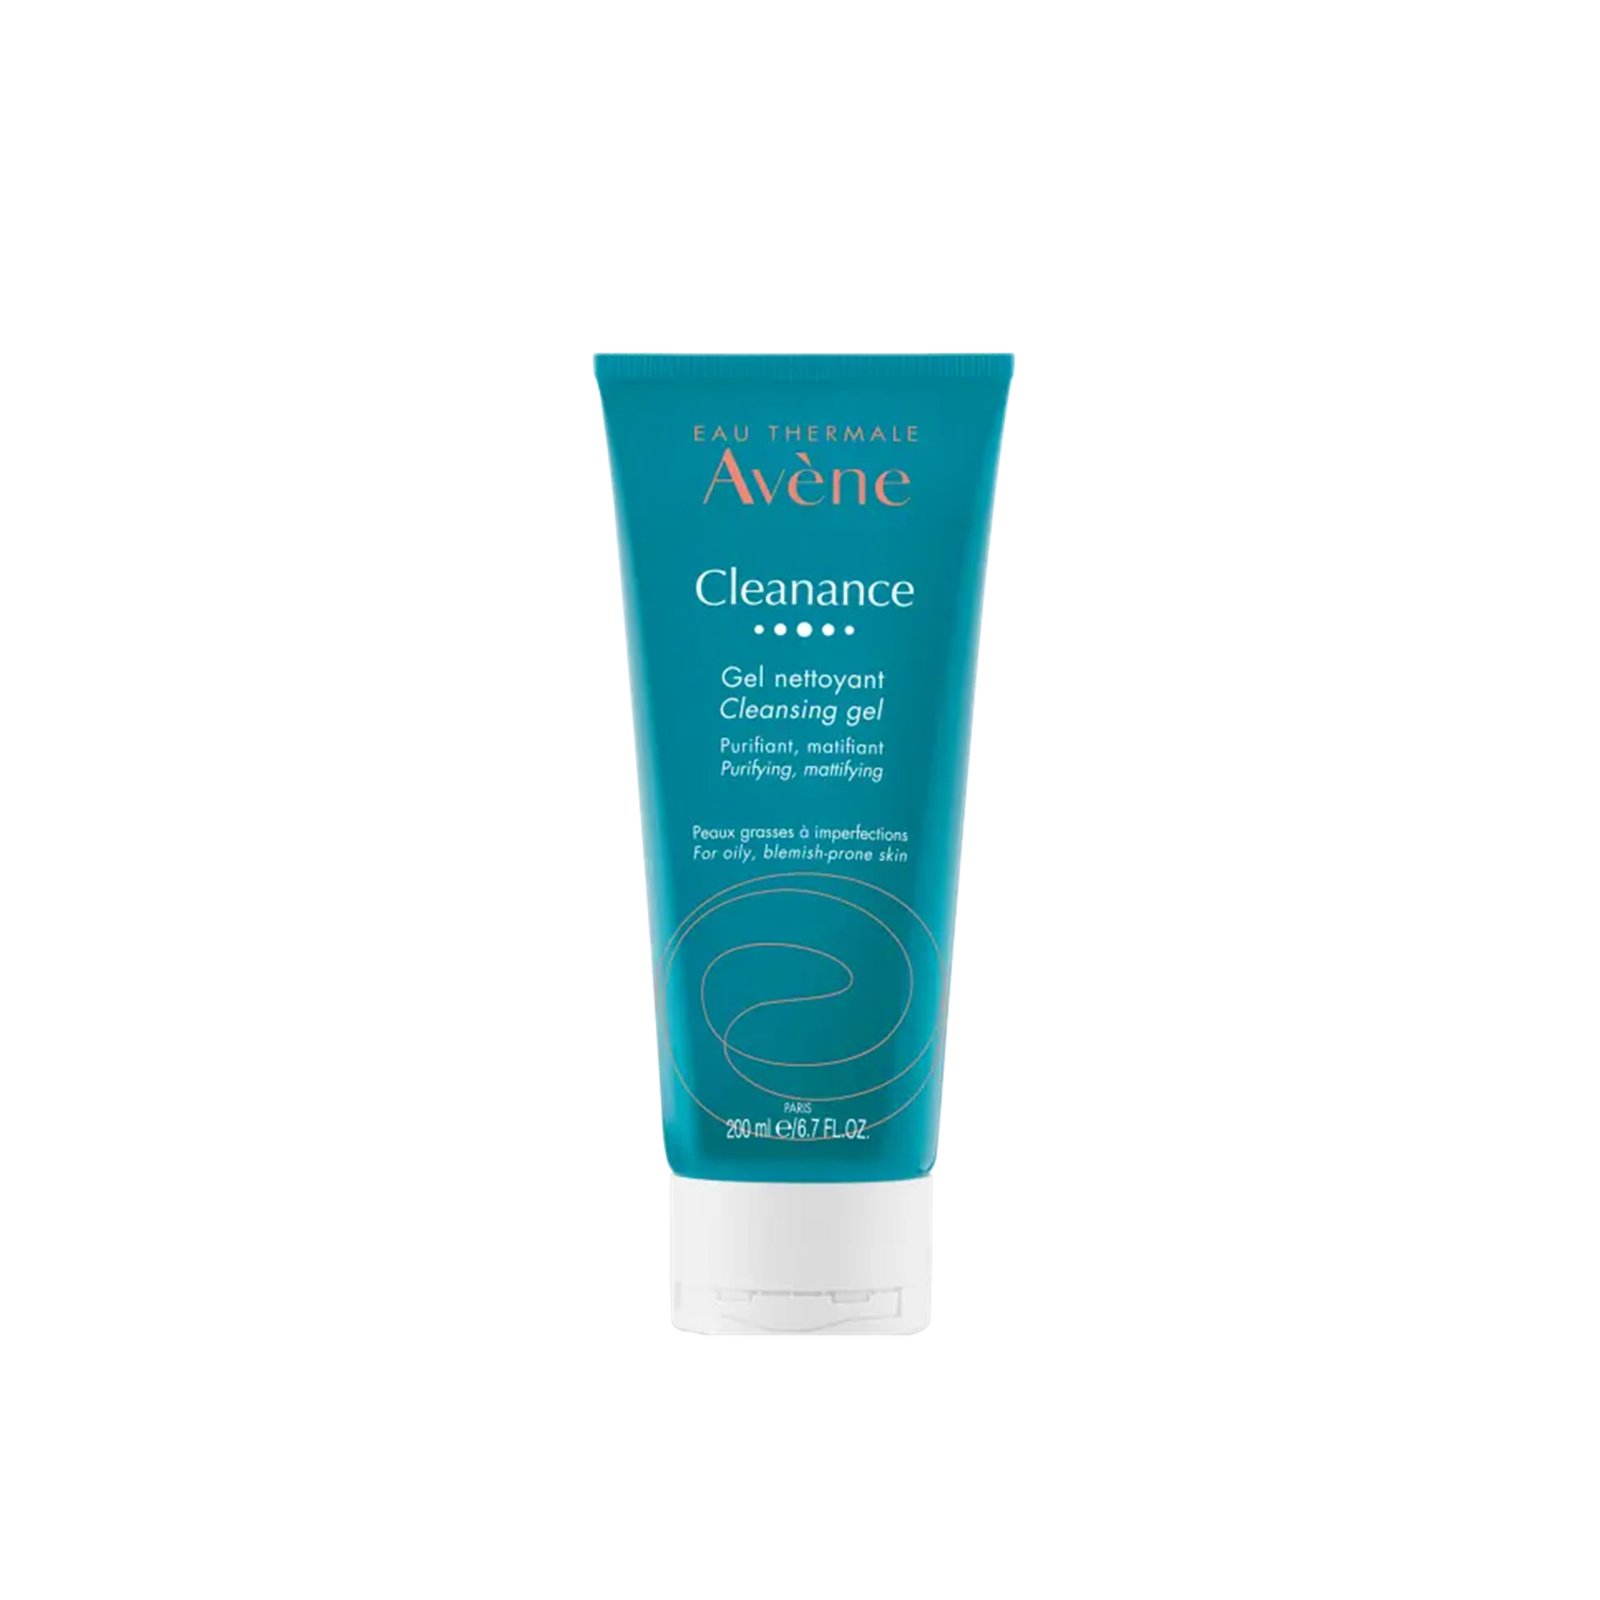 https://static.beautytocare.com/cdn-cgi/image/width=1600,height=1600,f=auto/media/catalog/product//a/v/avene-cleanance-cleansing-gel-200ml.png